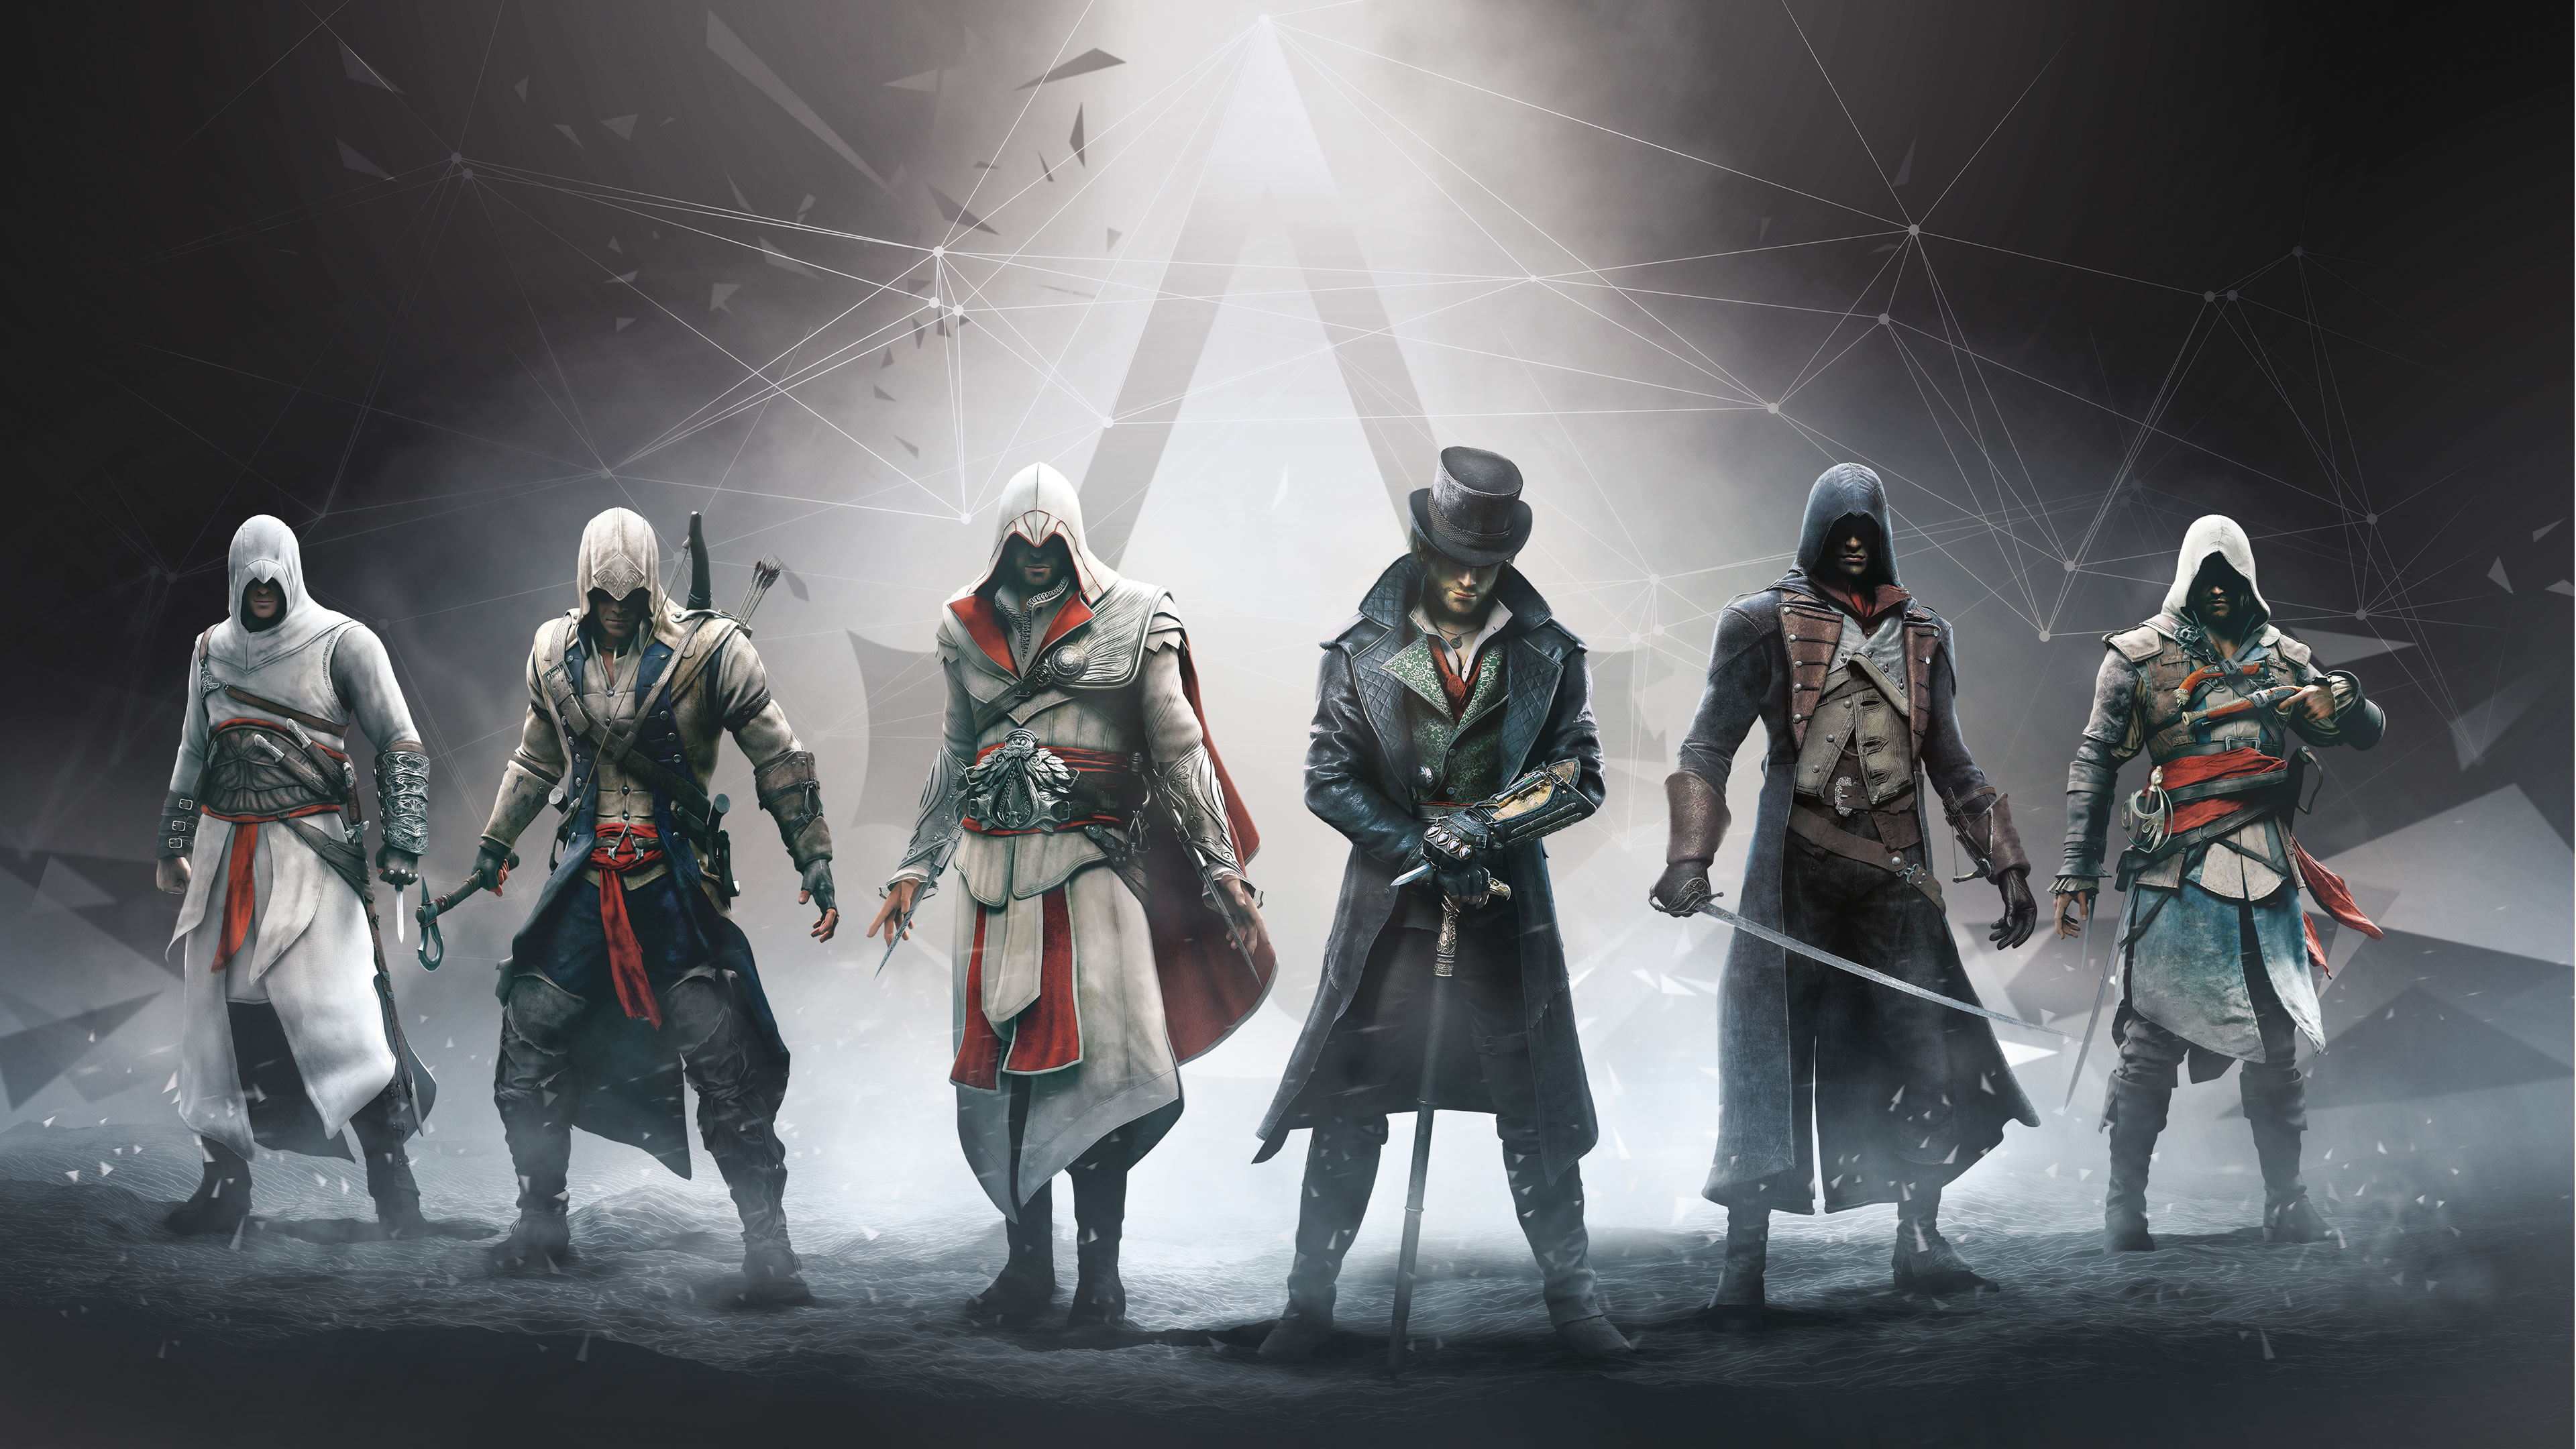 assassin's creed, video game, altair (assassin's creed), arno dorian, connor (assassin's creed), edward kenway, ezio (assassin's creed), jacob frye